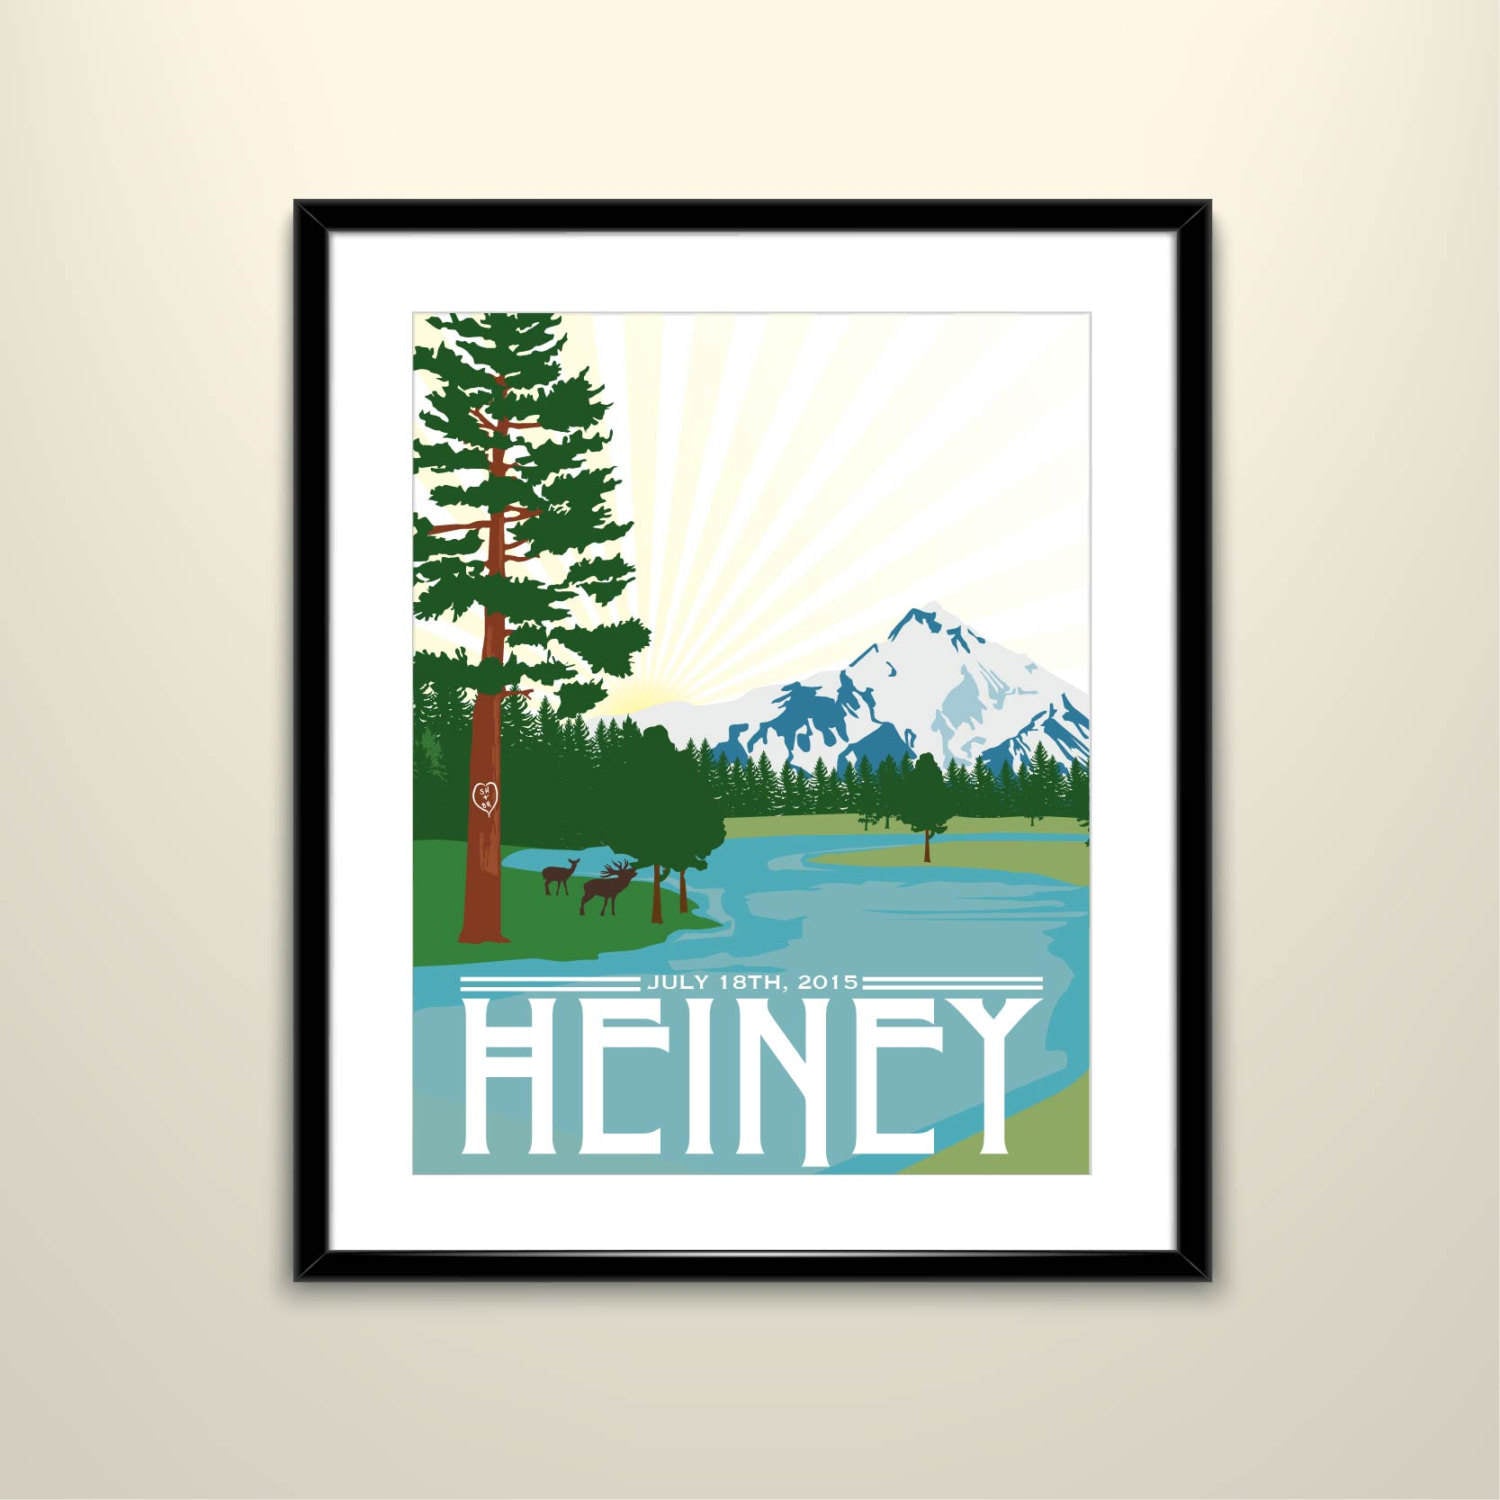 Mt Jefferson Poster (Head of the Metolius River) / Oregon Vintage Travel Poster / Wedding Poster / Wedding Gift (frame not included)